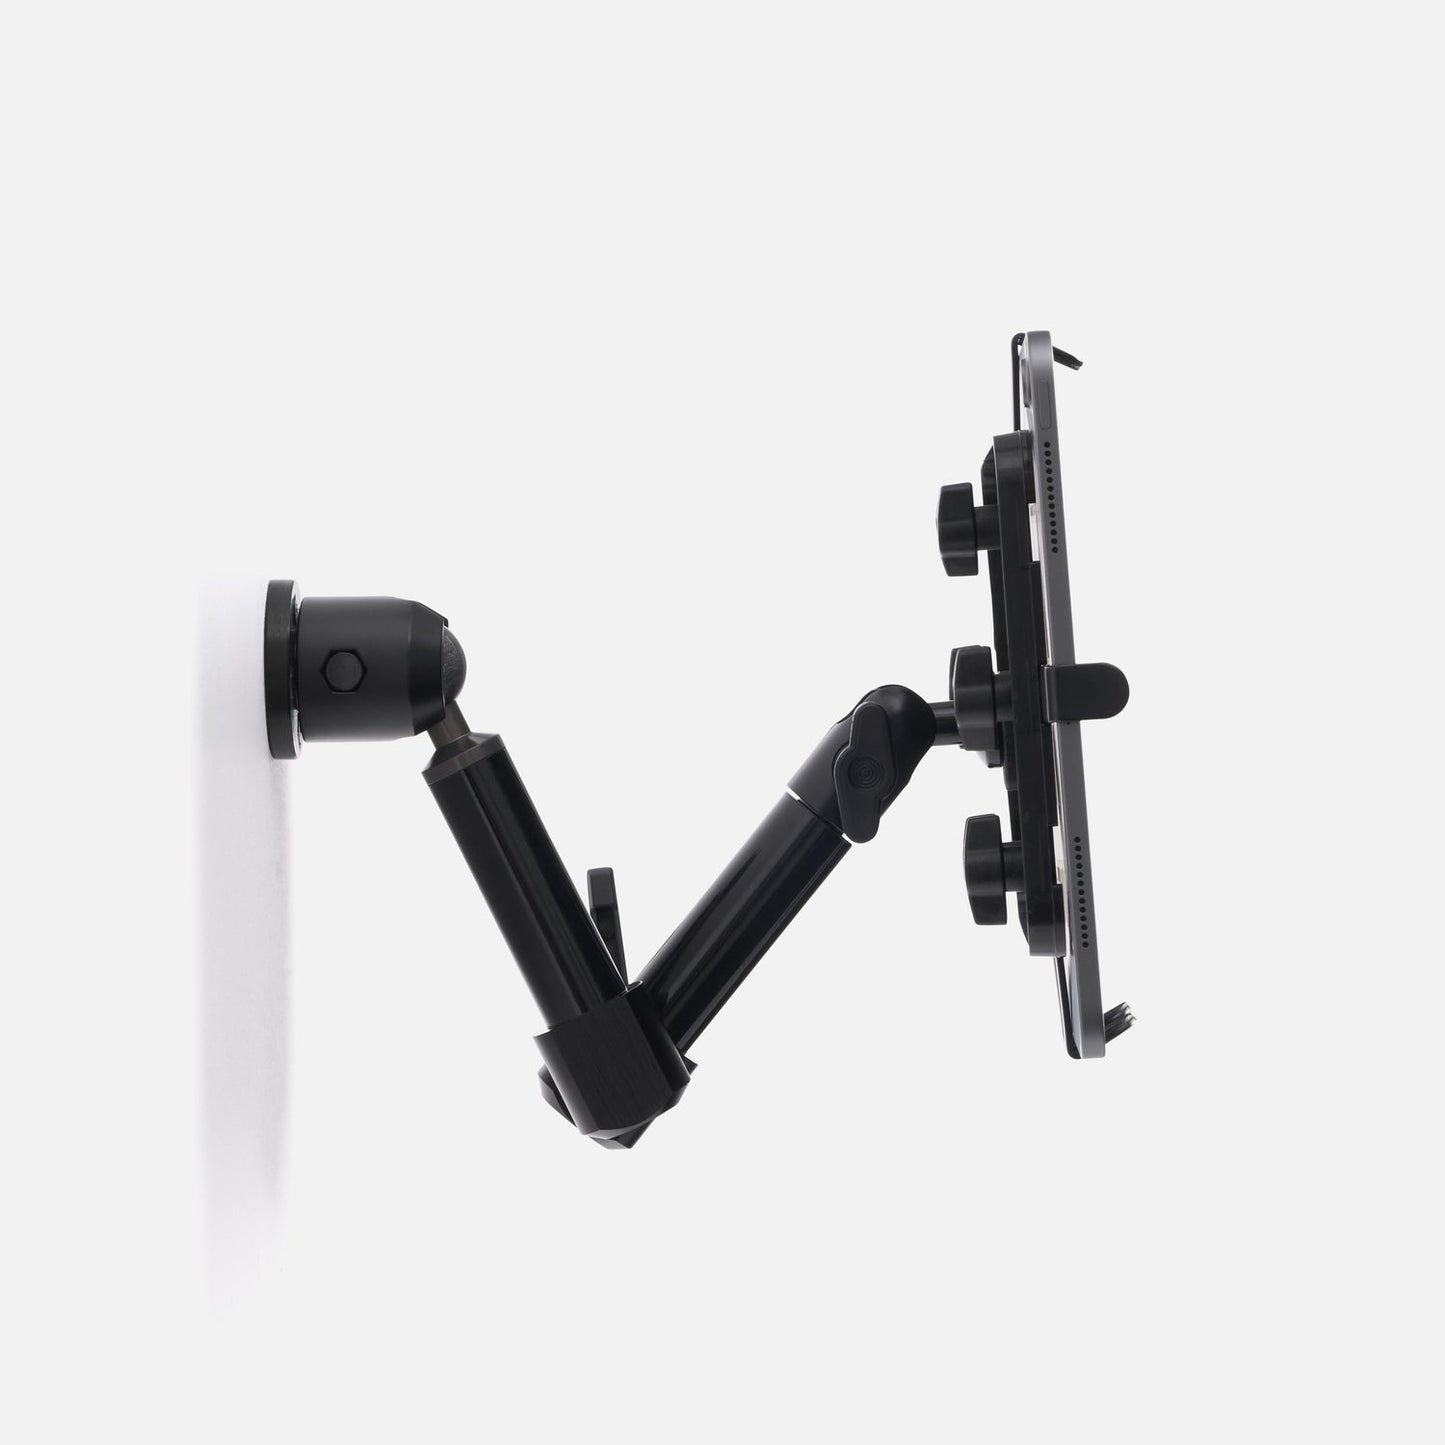 Utility - Tablet and iPad Wall Mount with 140mm Flexible Arm Mount